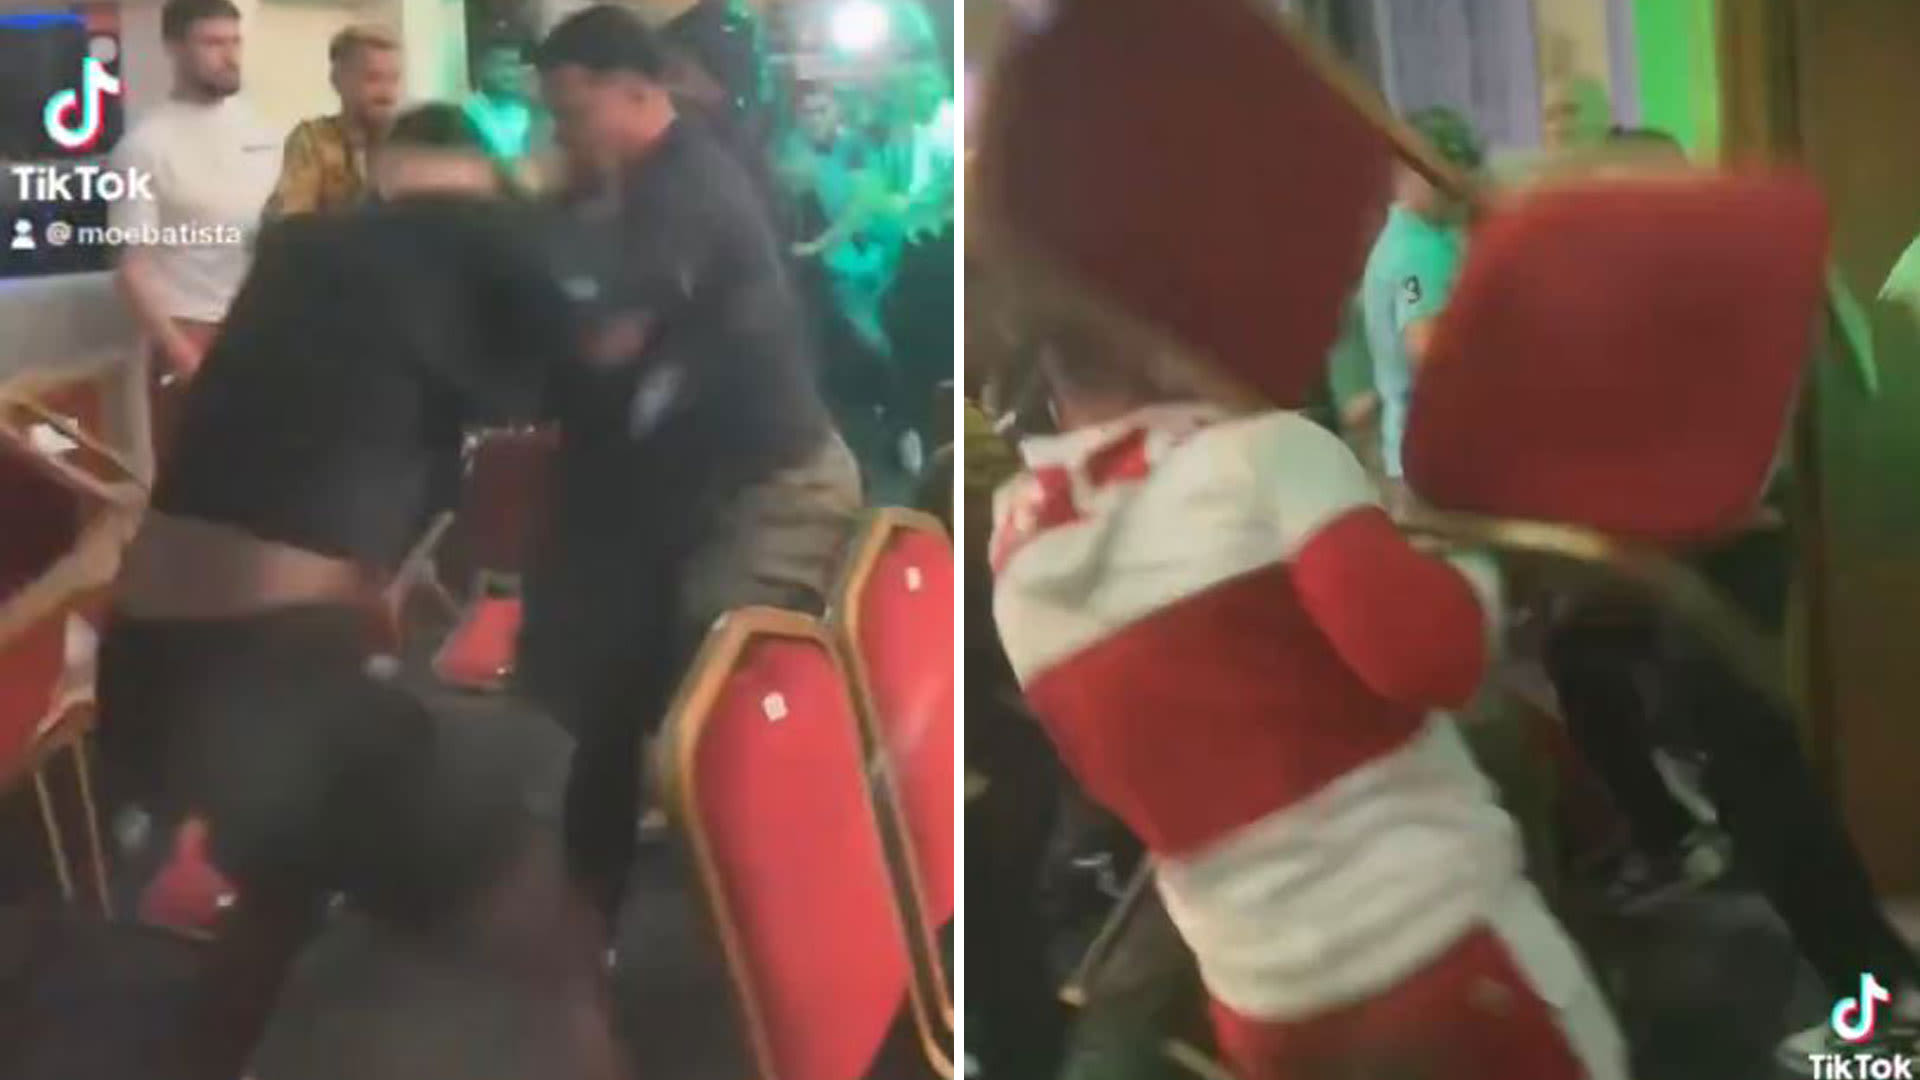 Misfits Boxing 14 descends into chaos as chairs are thrown in mass crowd brawl